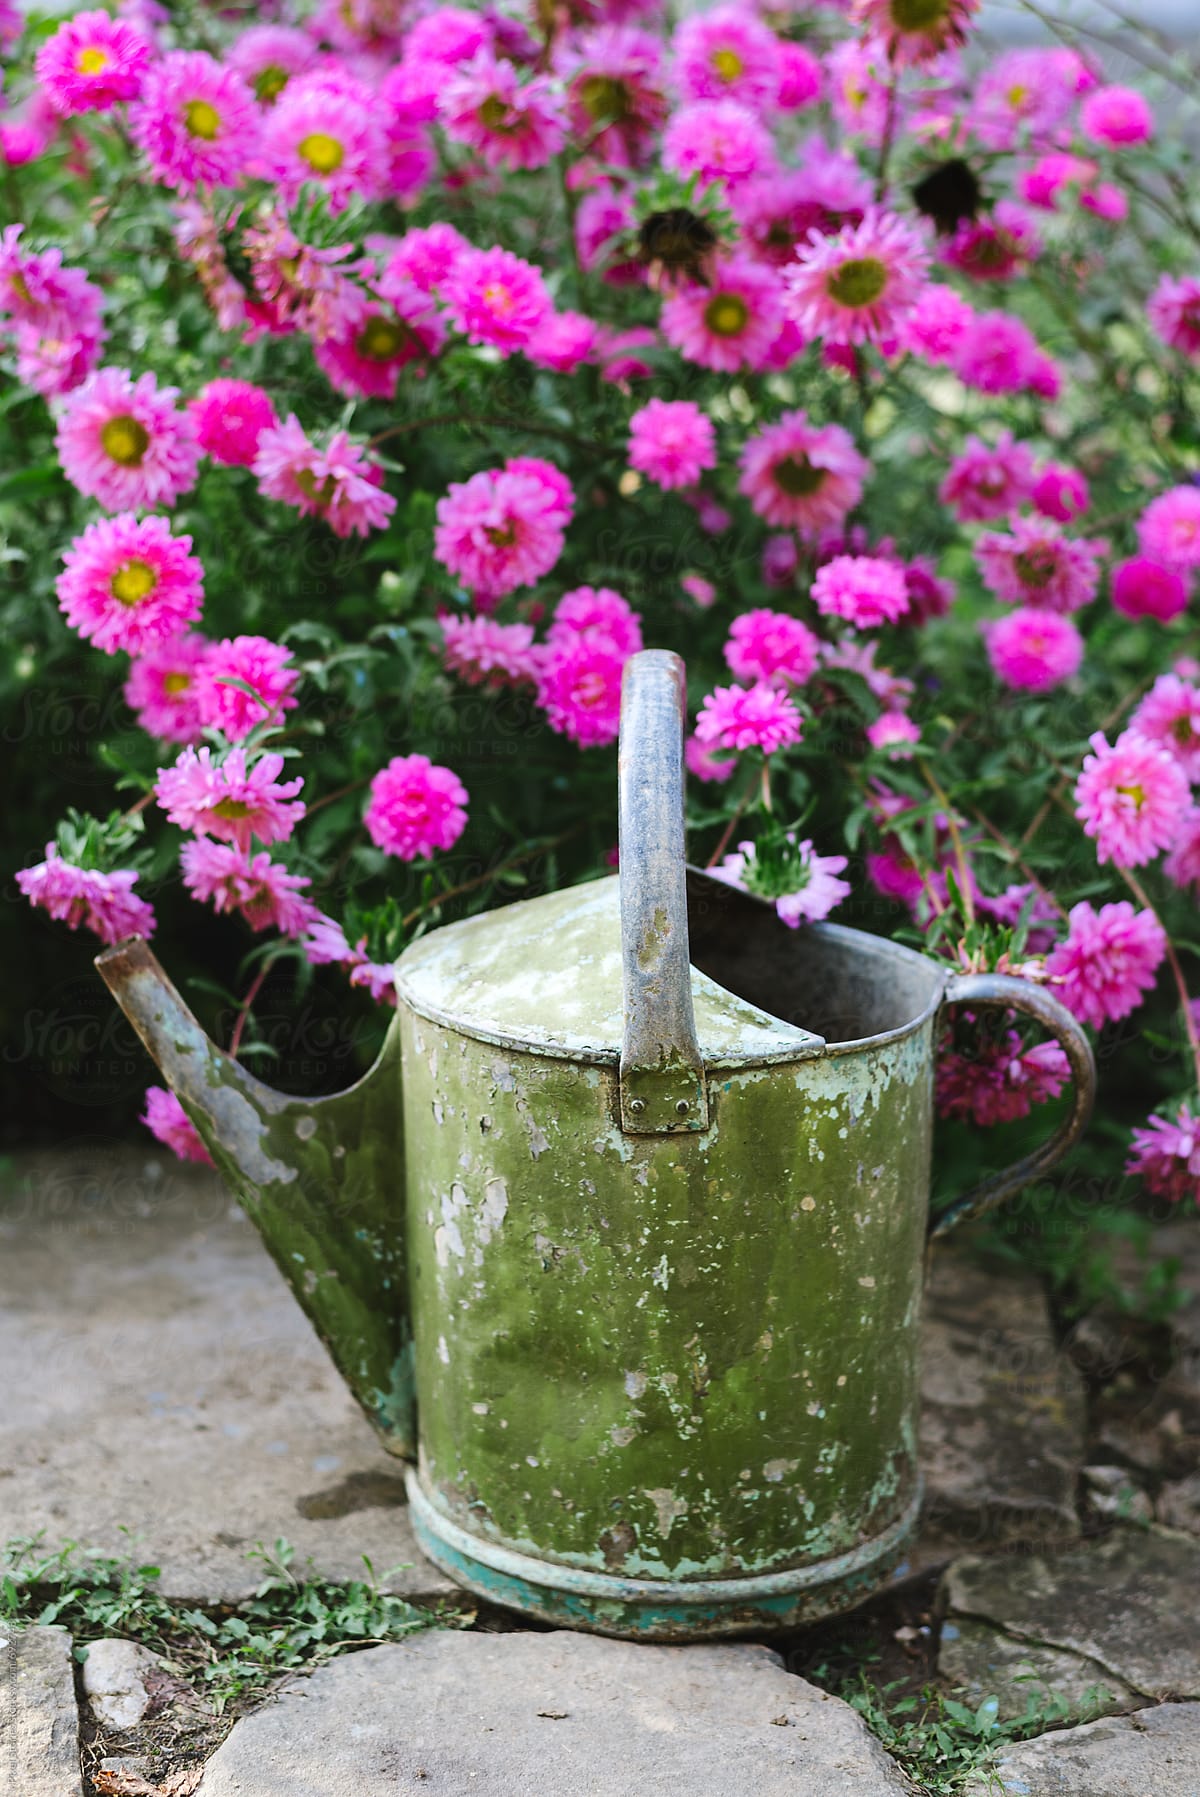 Old watering pot in front of pink flowers